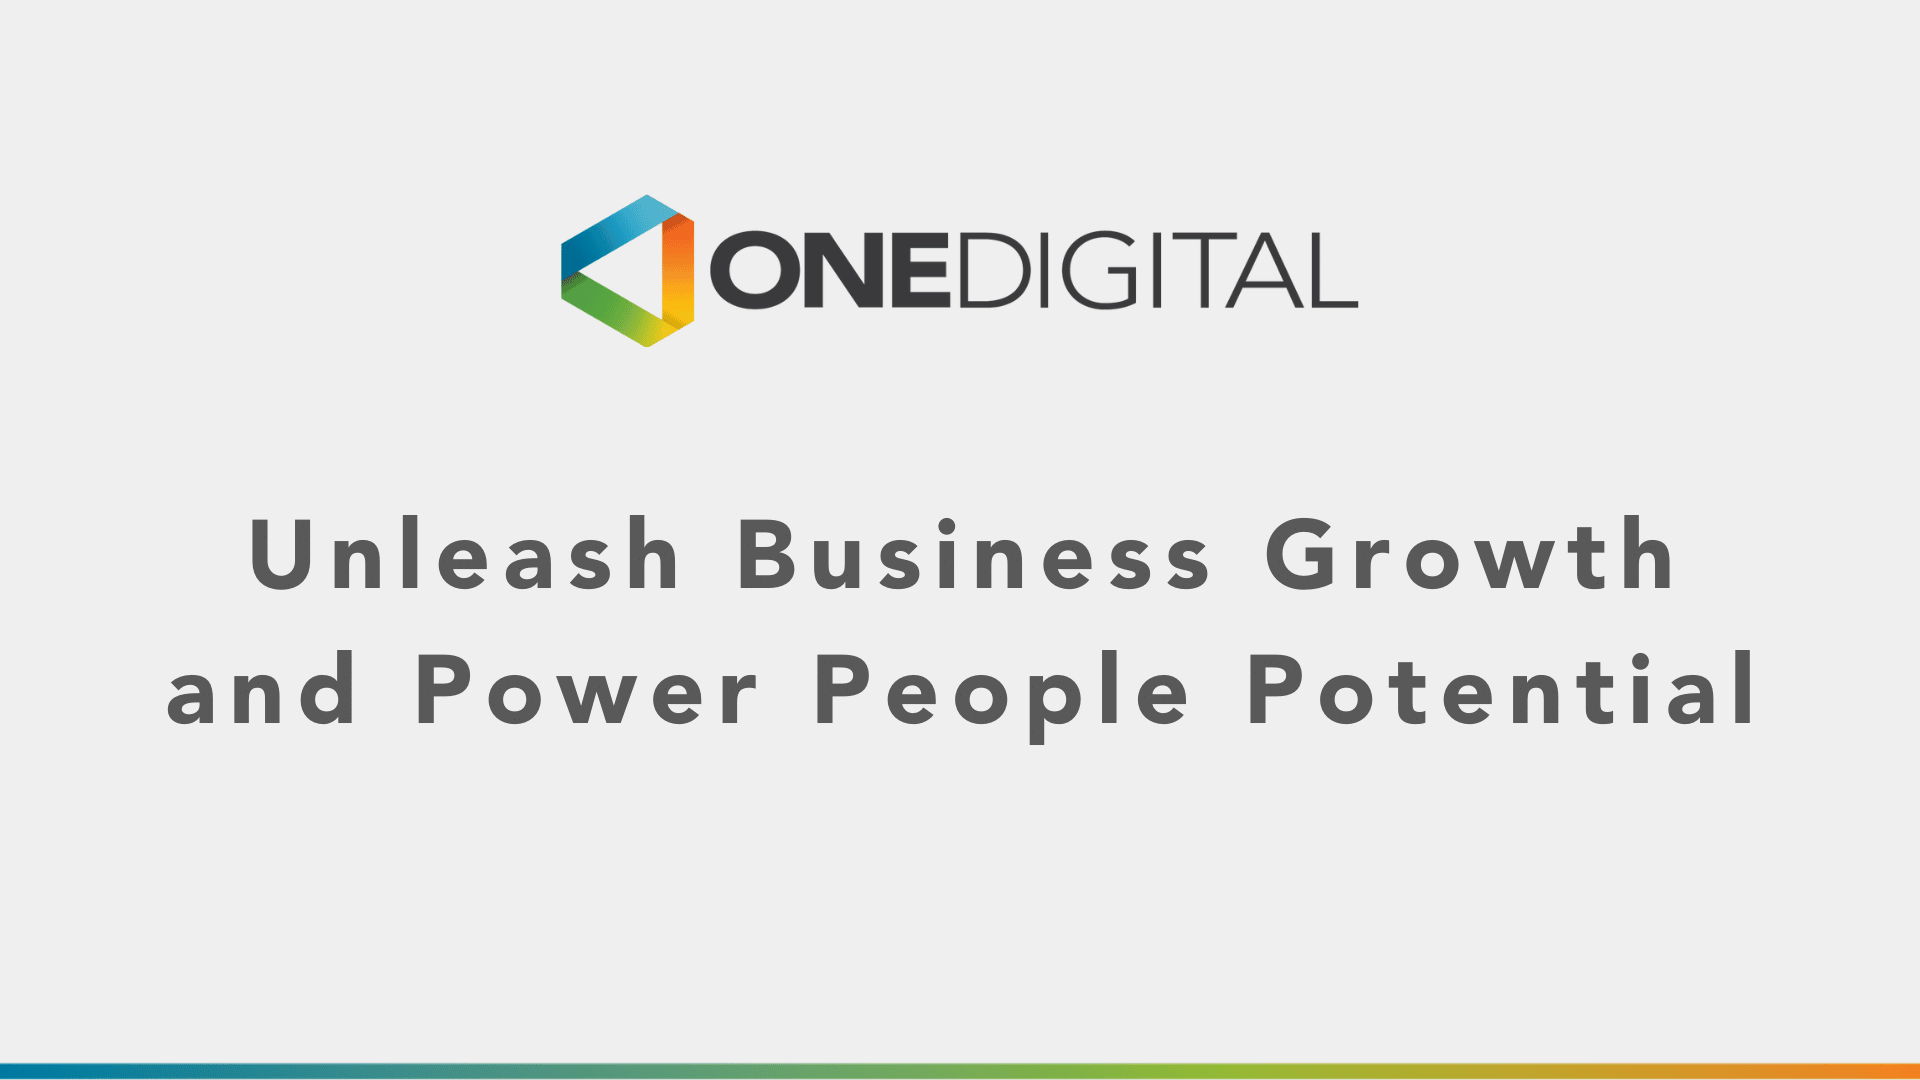 OneDigital | Unleash Your Business and People Potential